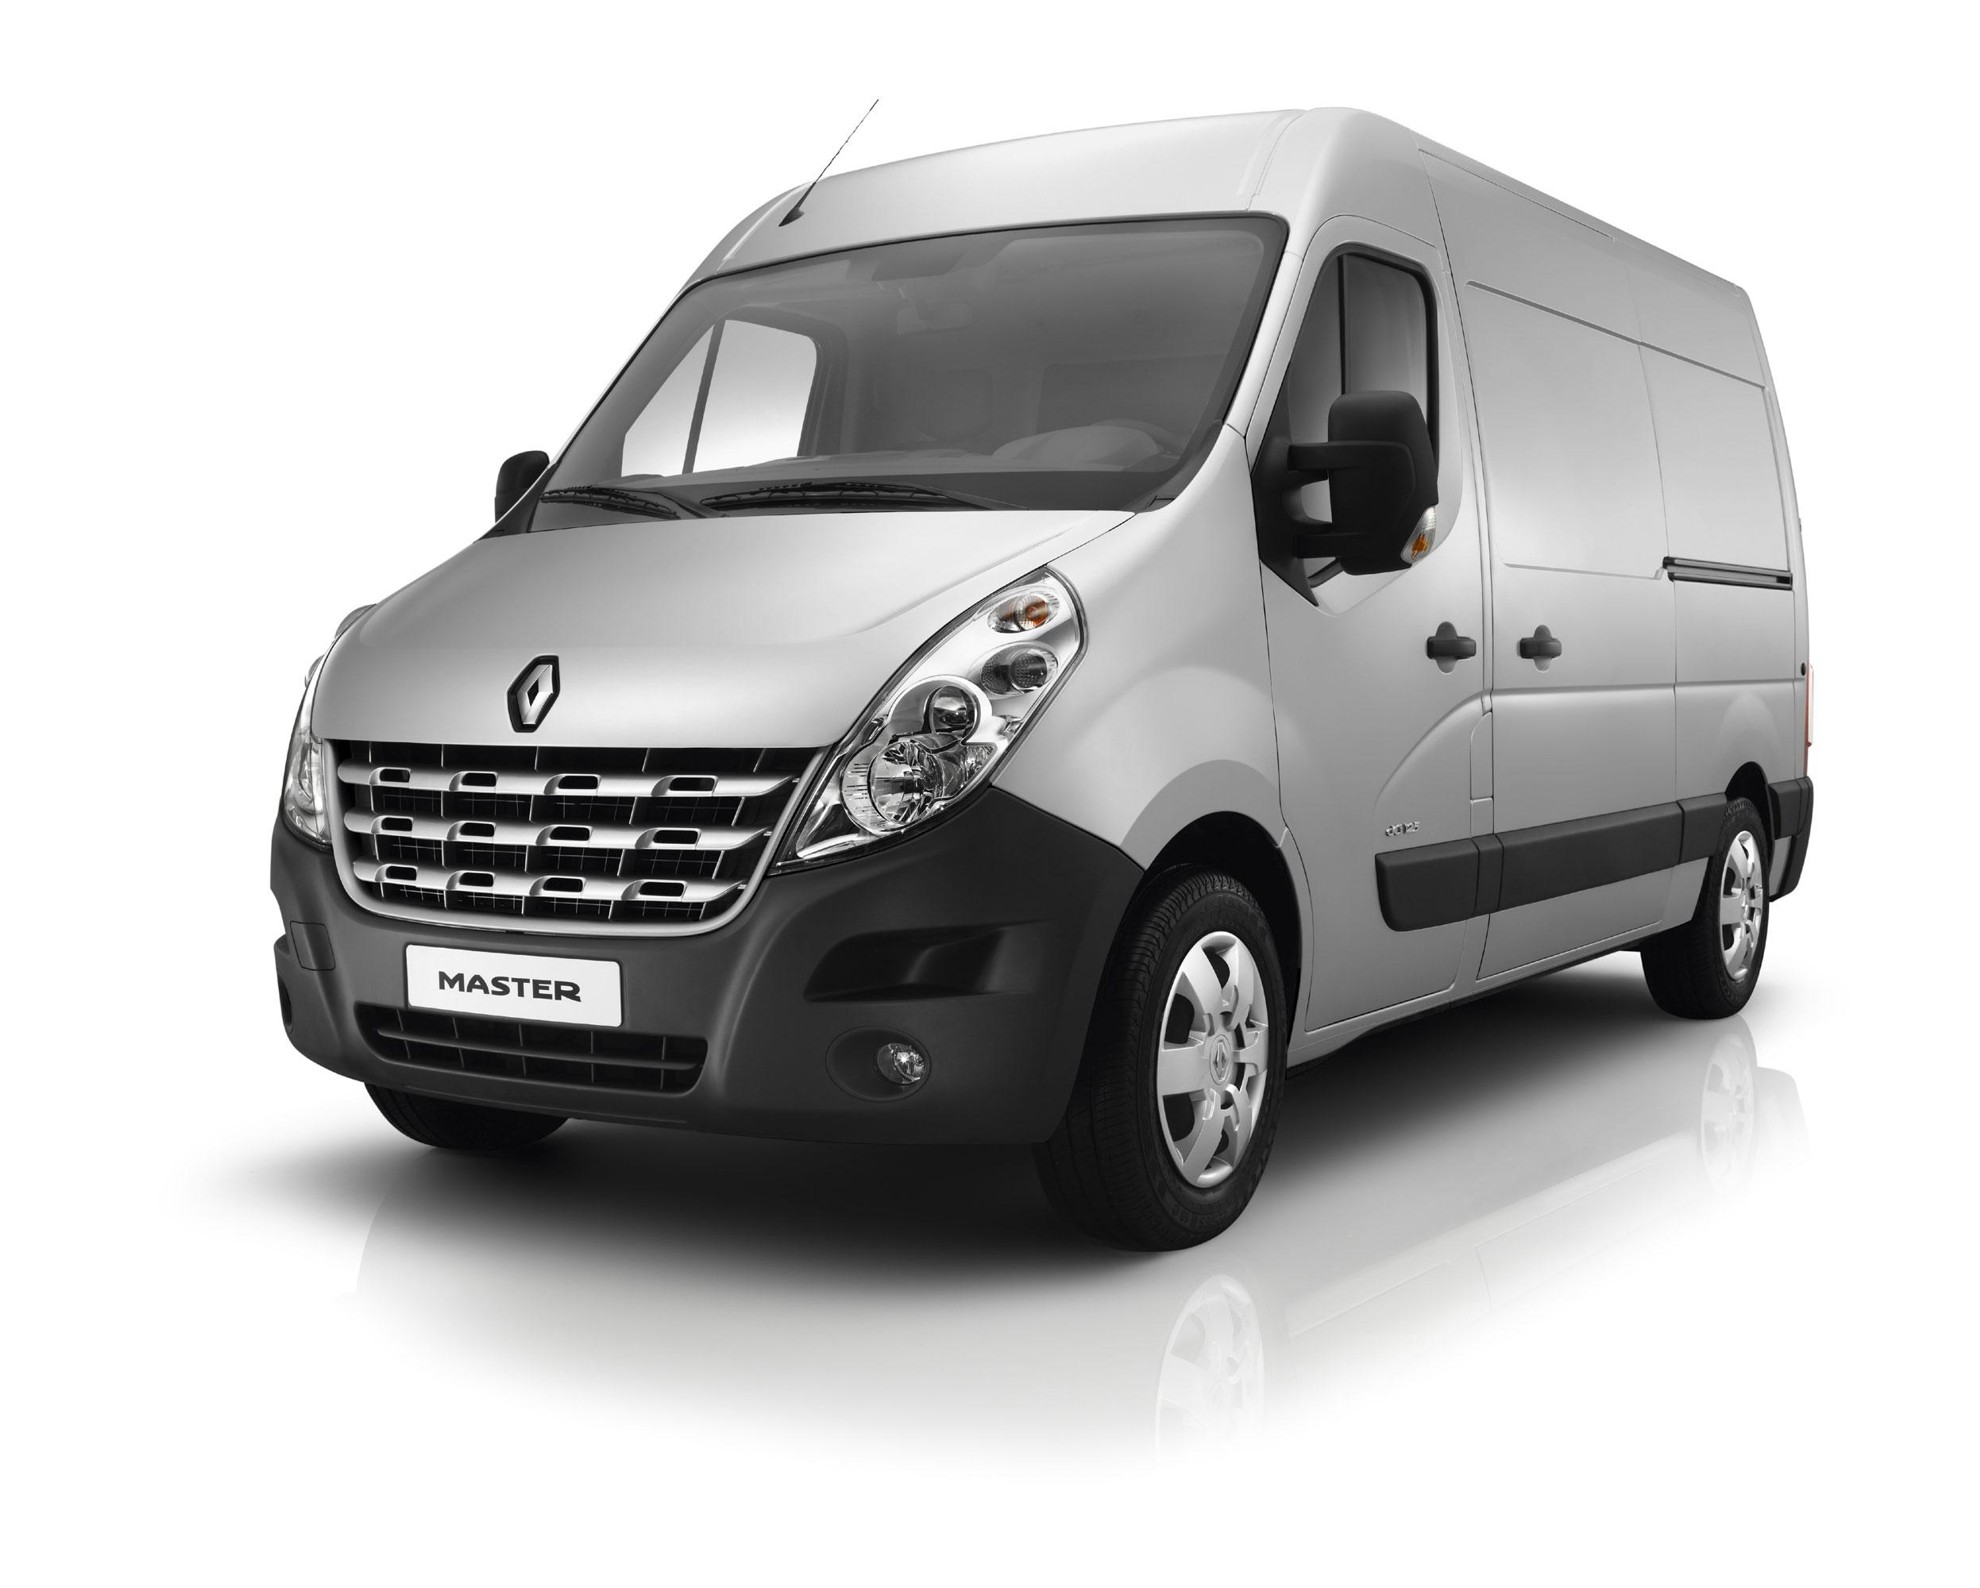 New Renault Master made in Brazil South America